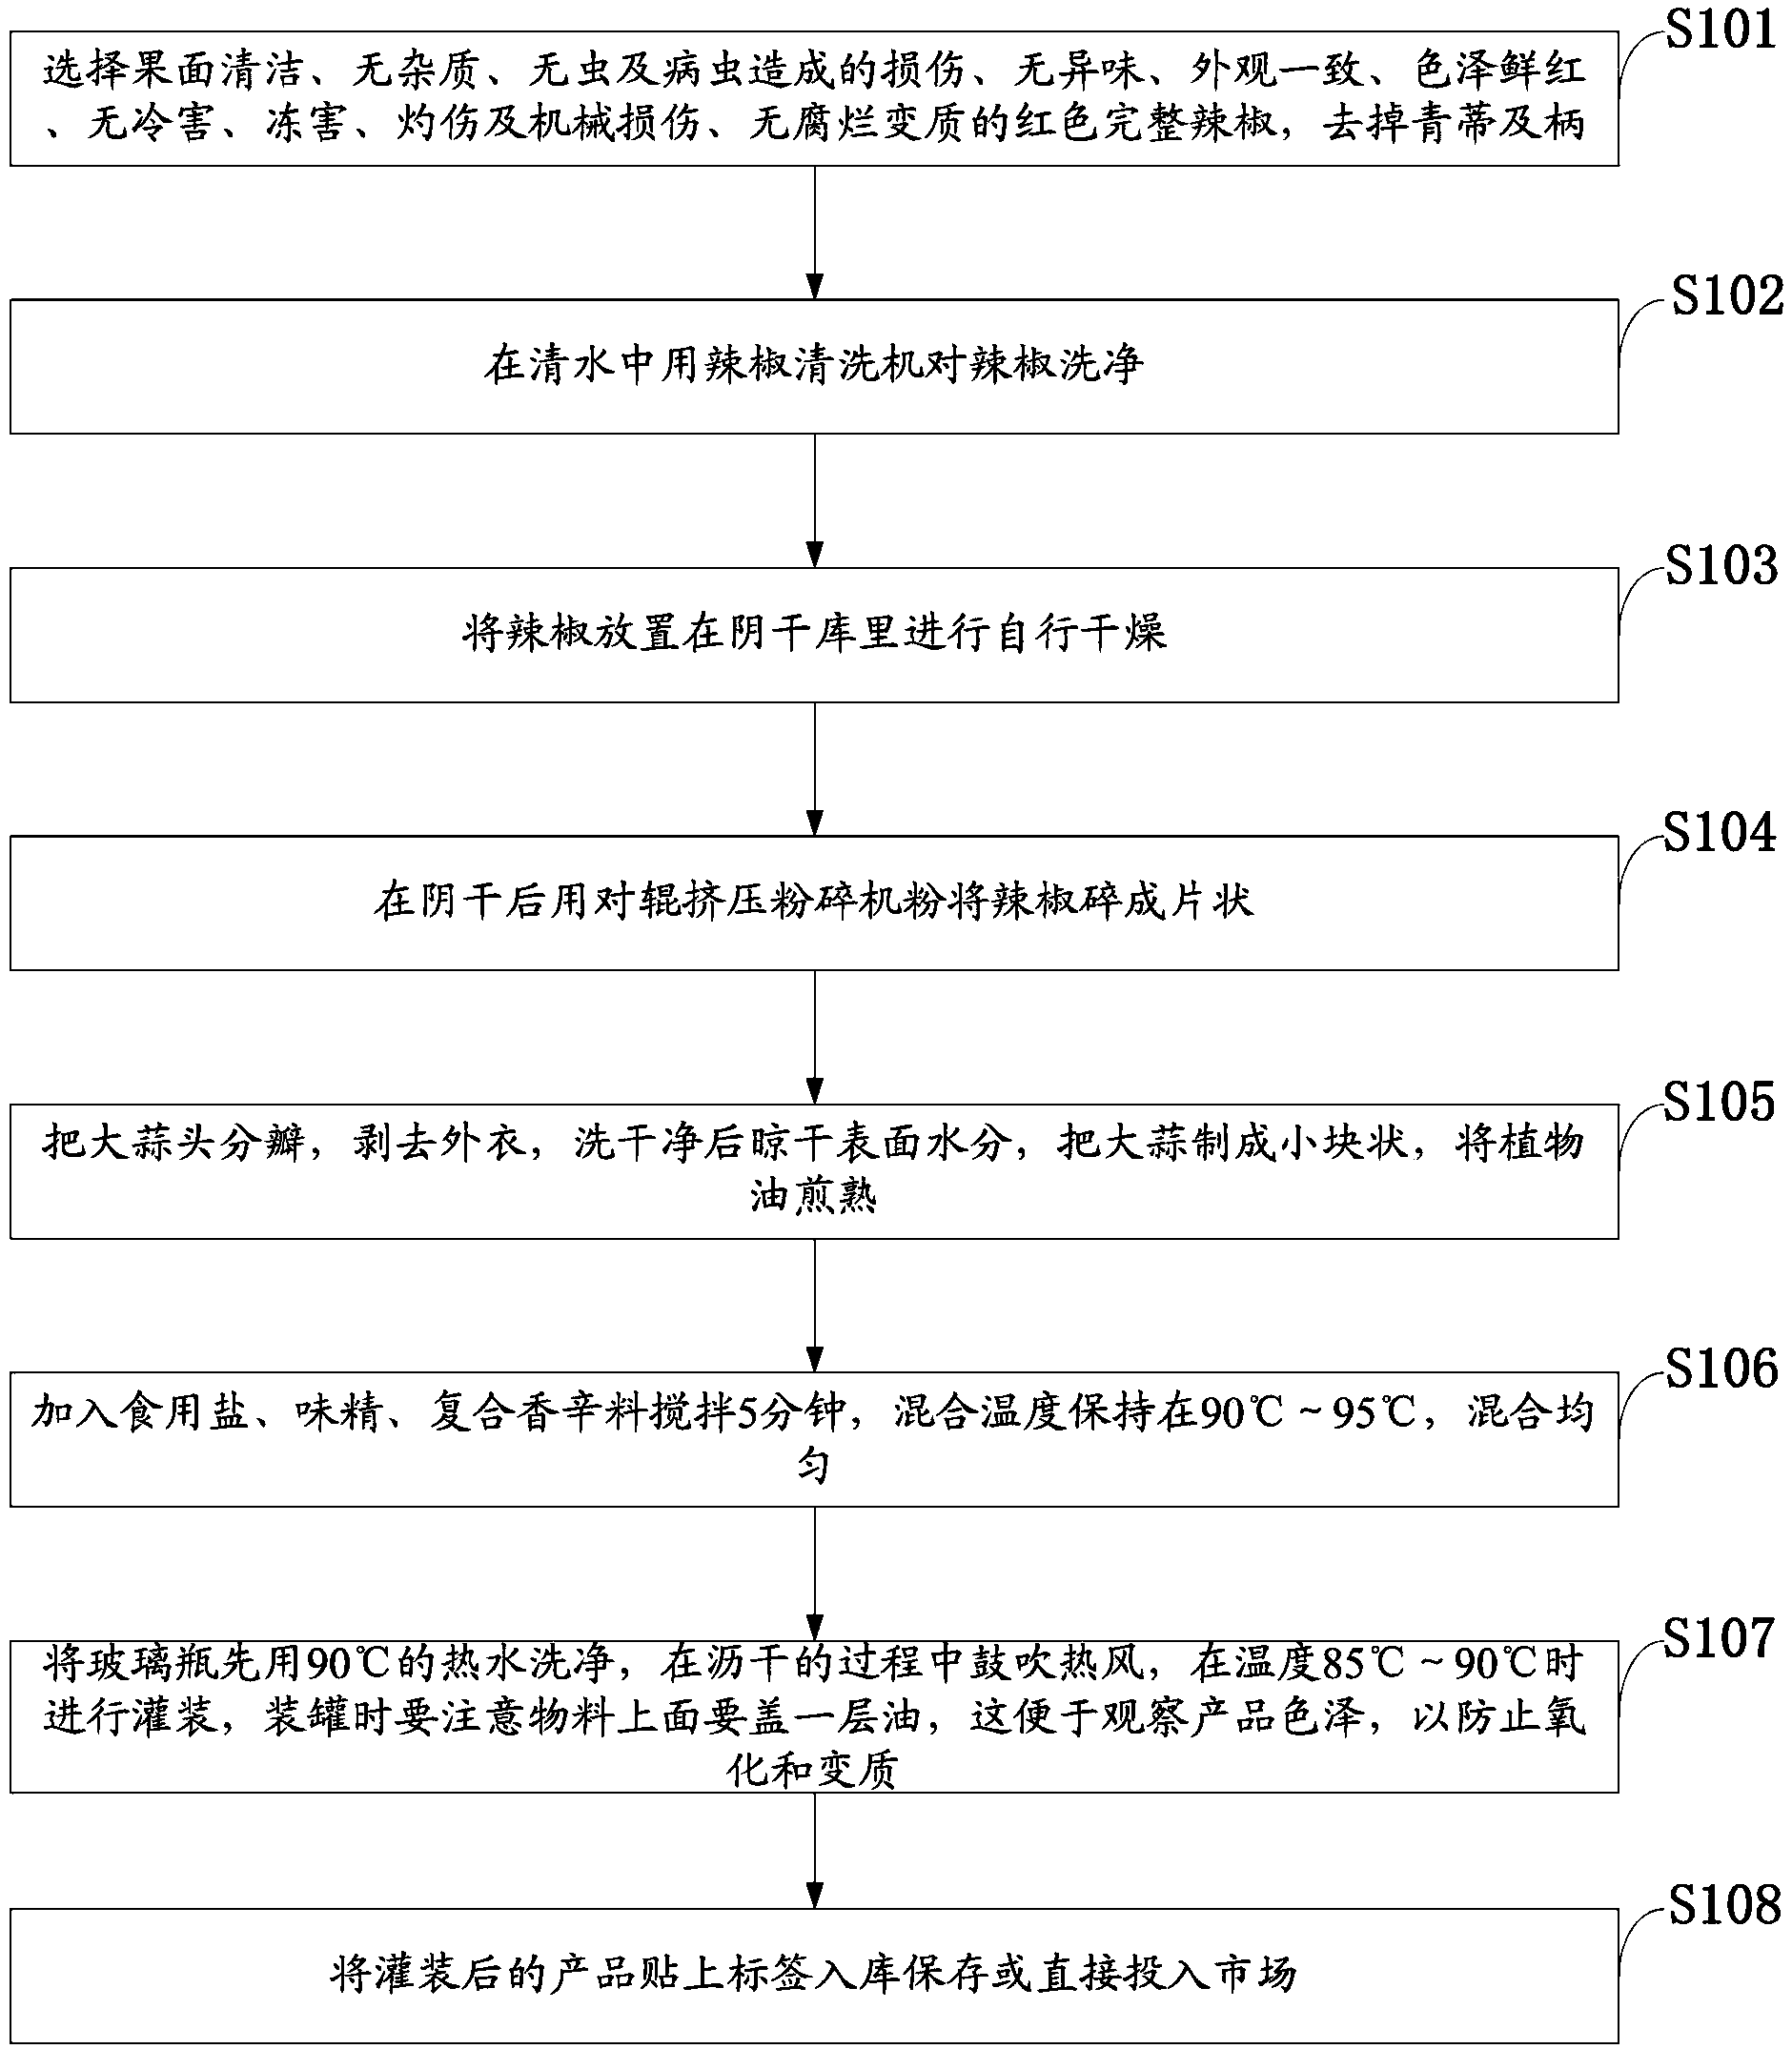 Formula and preparation method of hot and spicy sauce